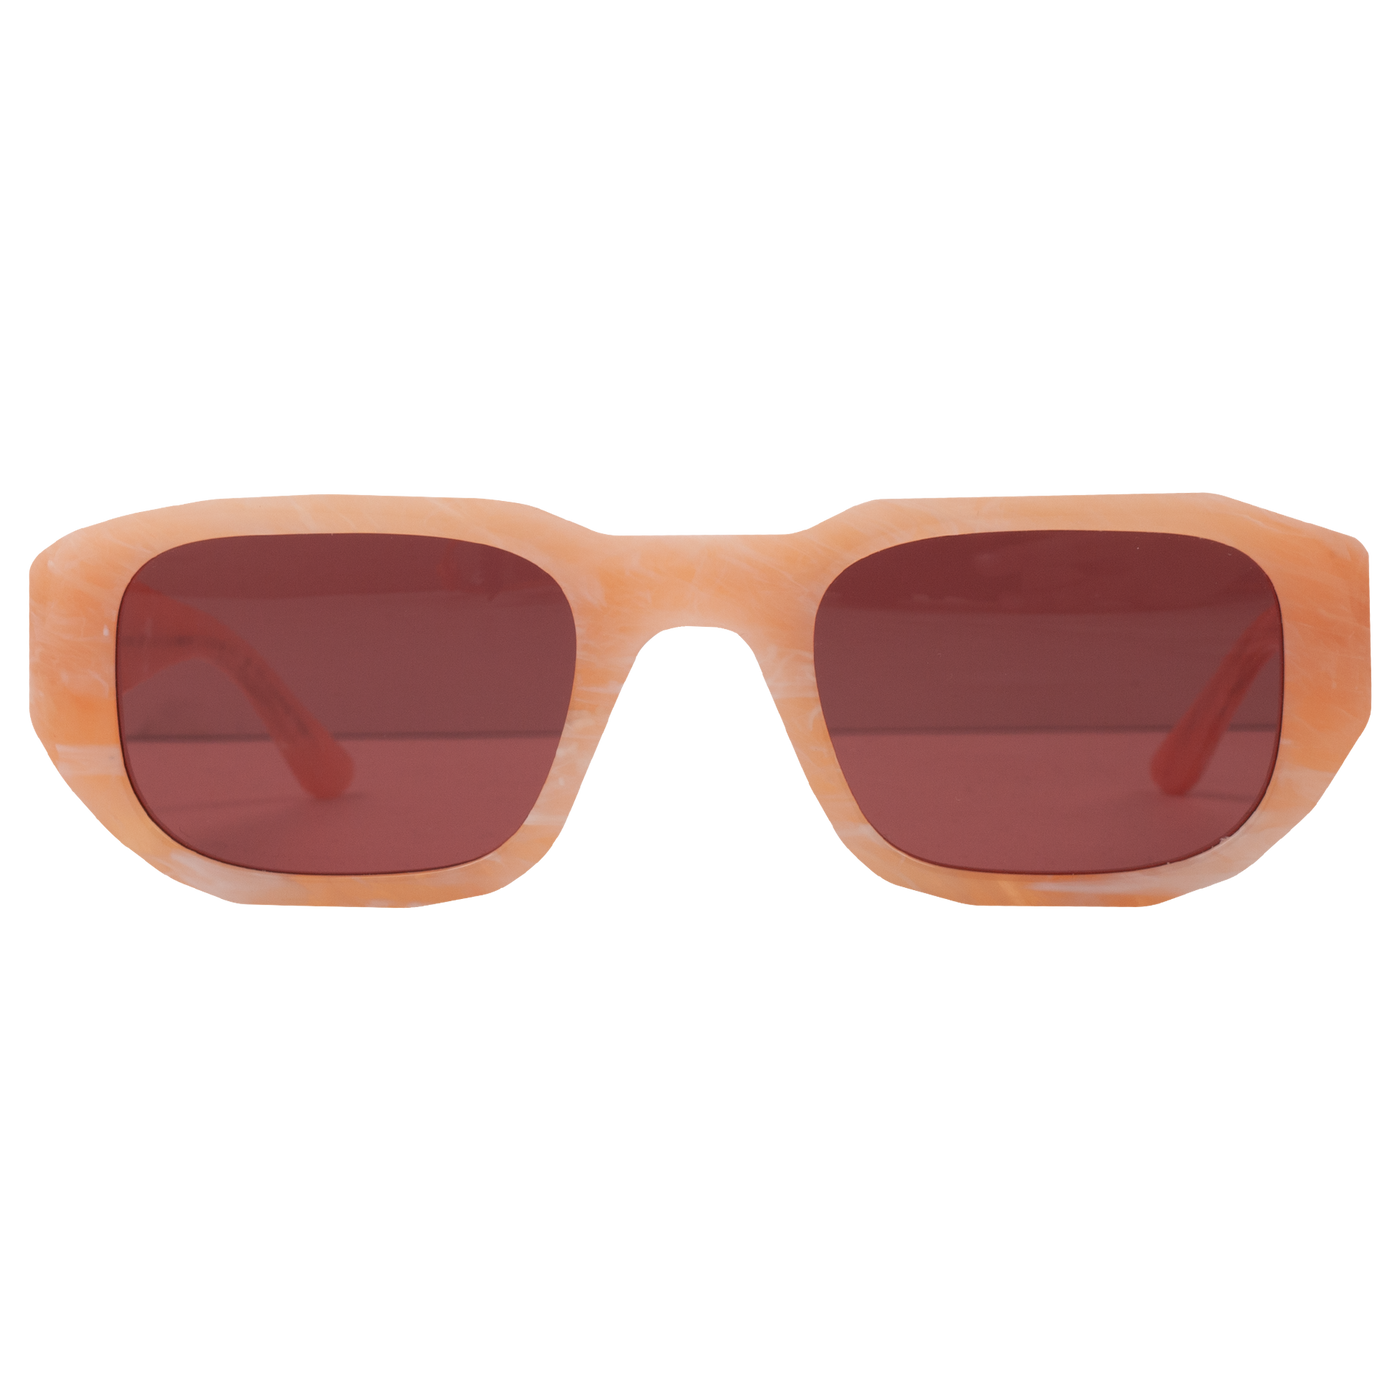 THIERRY LASRY FOR POTN VICTIMY